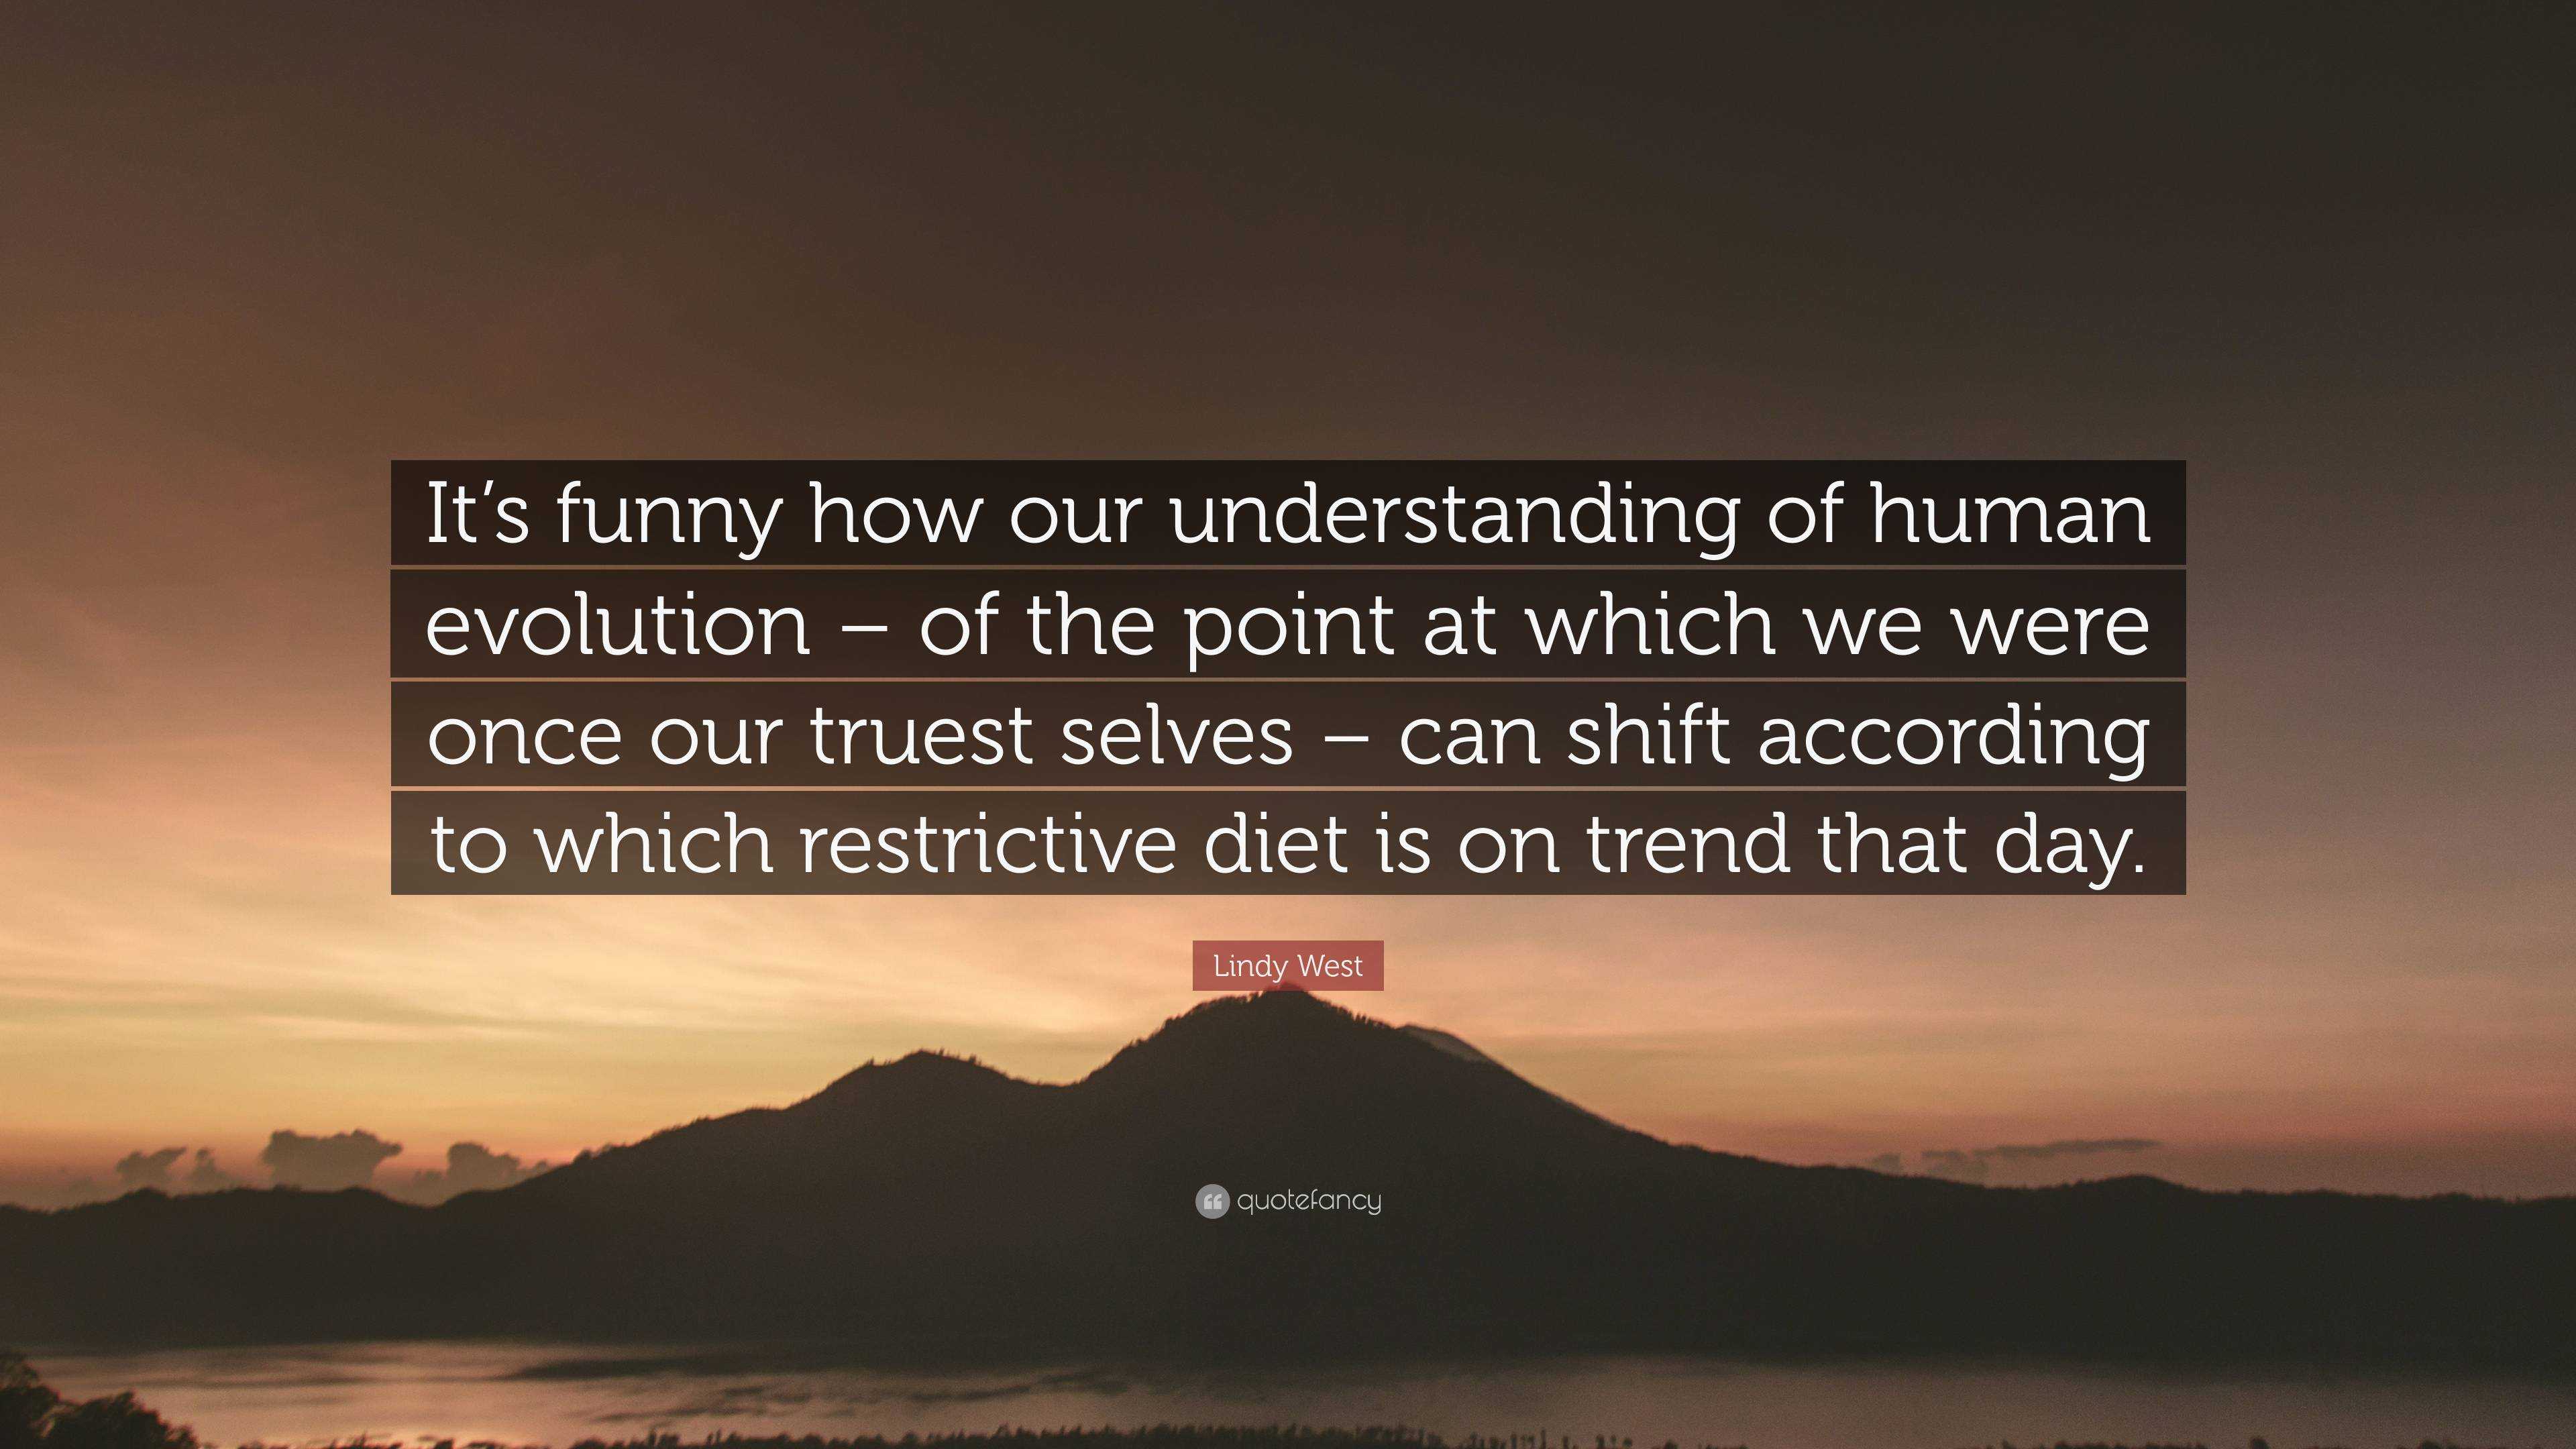 Lindy West Quote: “It's funny how our understanding of human evolution – of  the point at which we were once our truest selves – can shift a...”